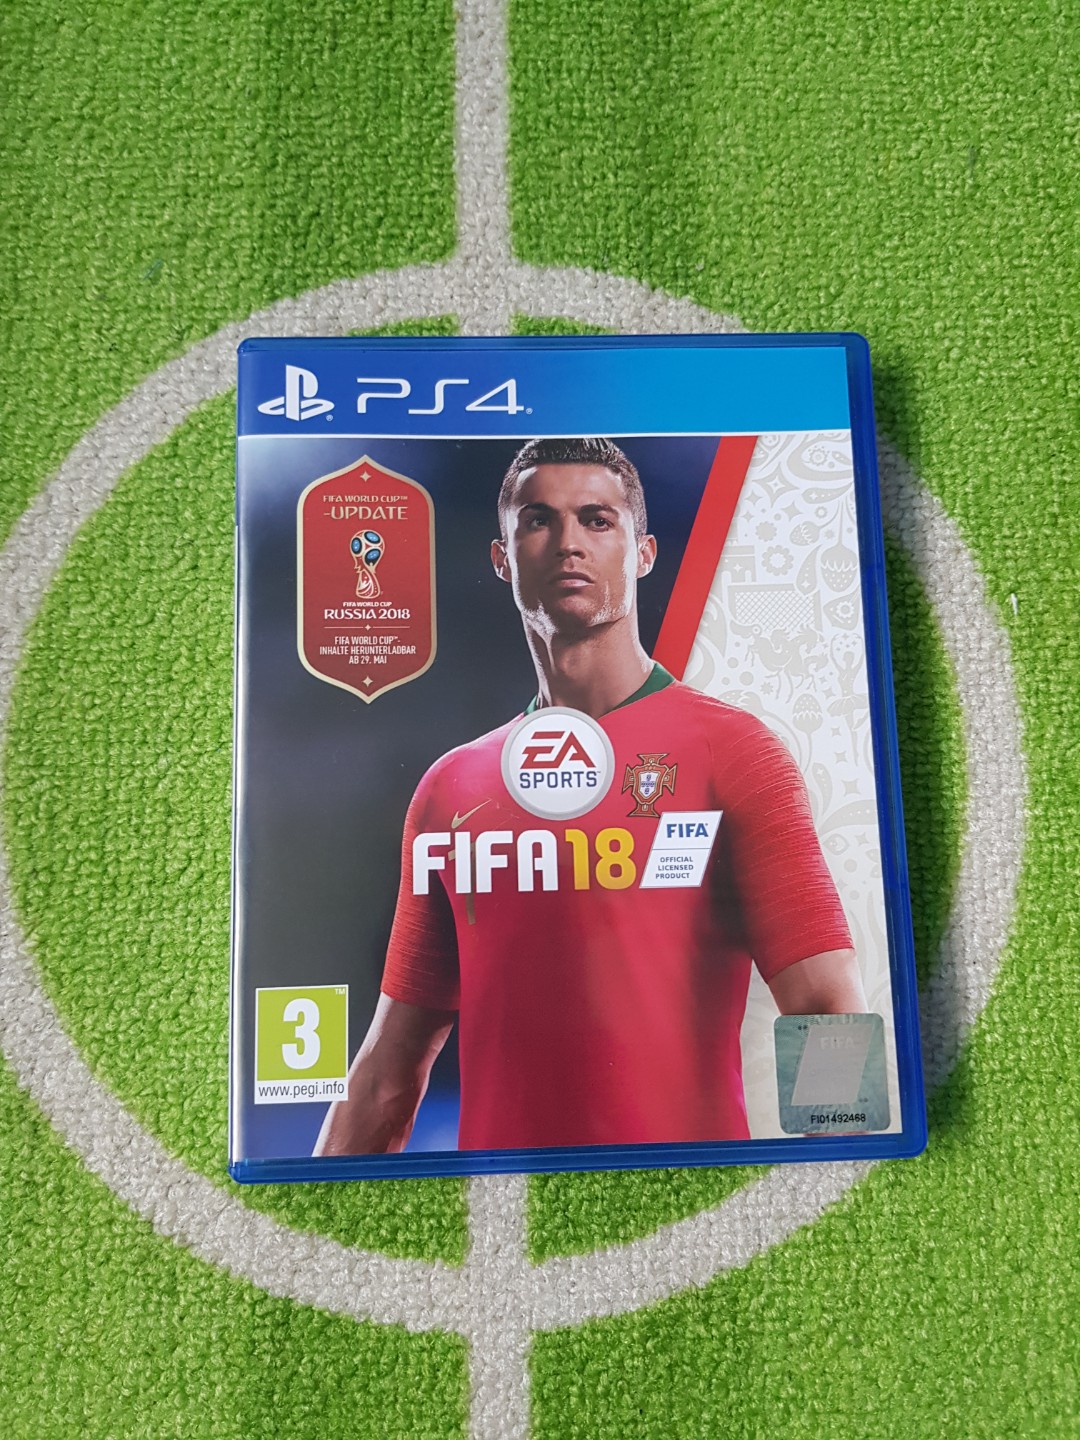 Fifa 18 Ps4 Ronaldo Cover Protugal European Champion Download Free World Cup Edition Video Gaming Video Games Playstation On Carousell